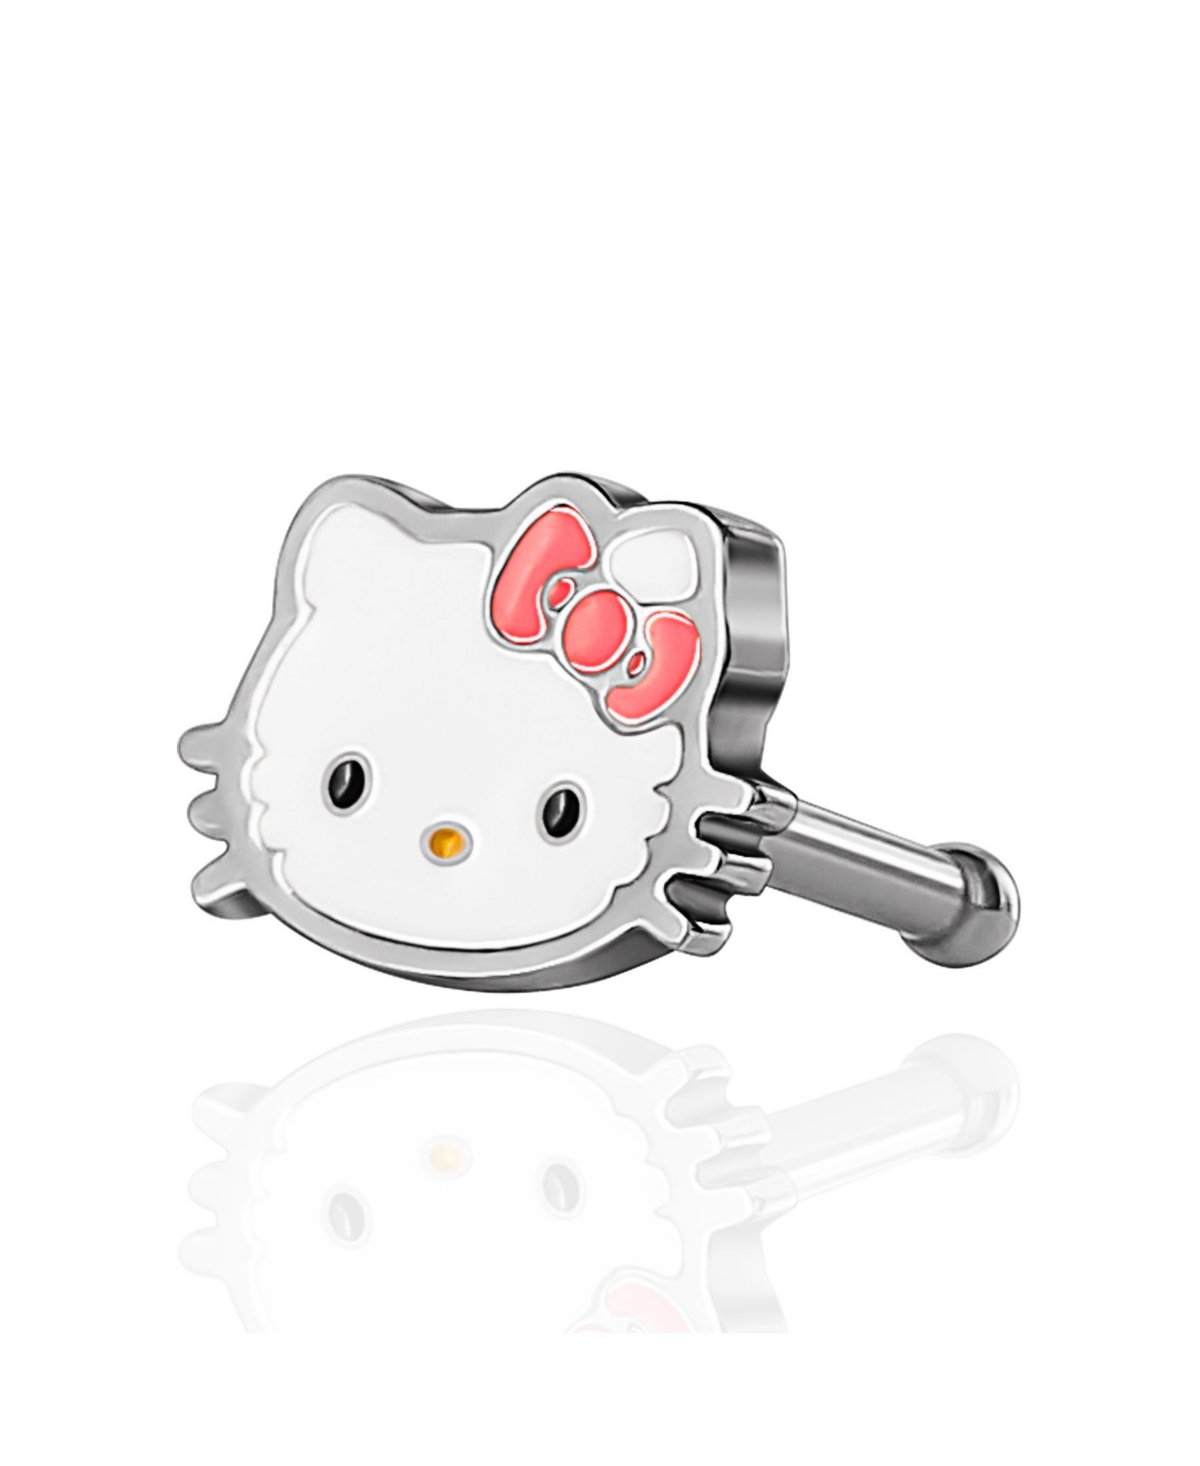 Sanrio Hello Kitty Authentic Officially Licensed Womens 20G Stainless Steel Nose Ring Bone Stud - Silver tone, white, pink